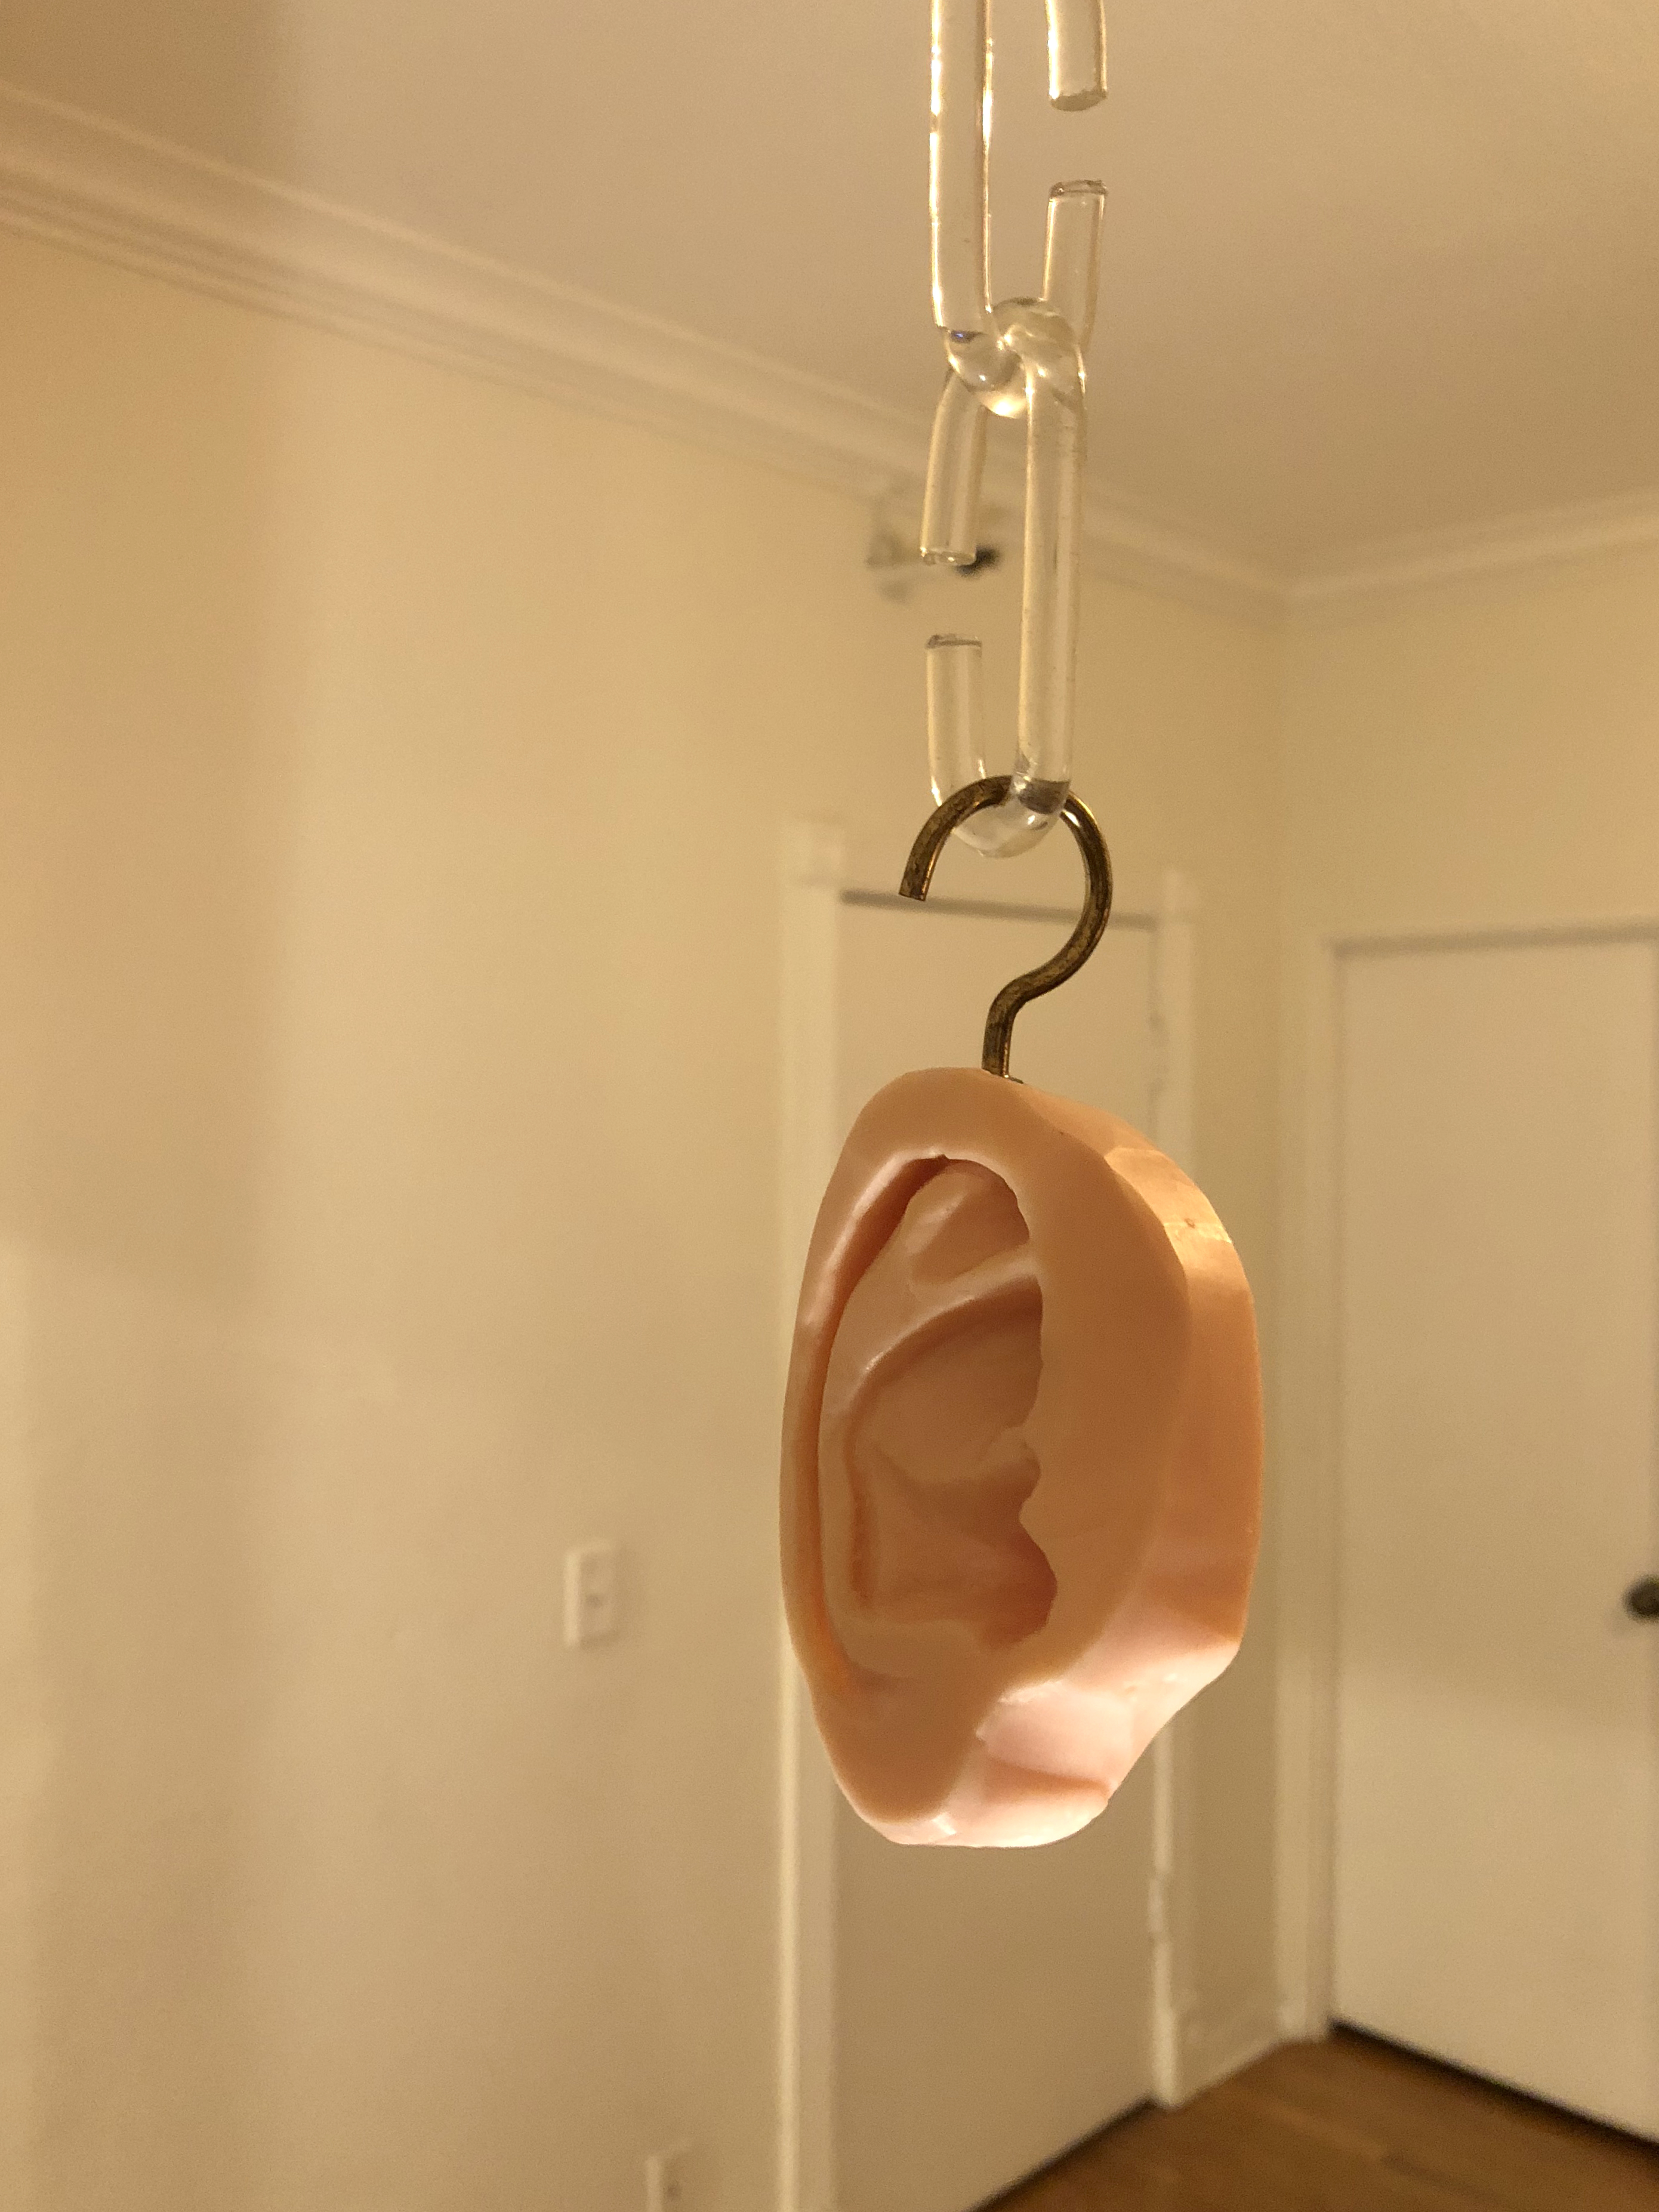 A dove soap bar carved into the shape of an ear hung from the ceiling by plastic chains